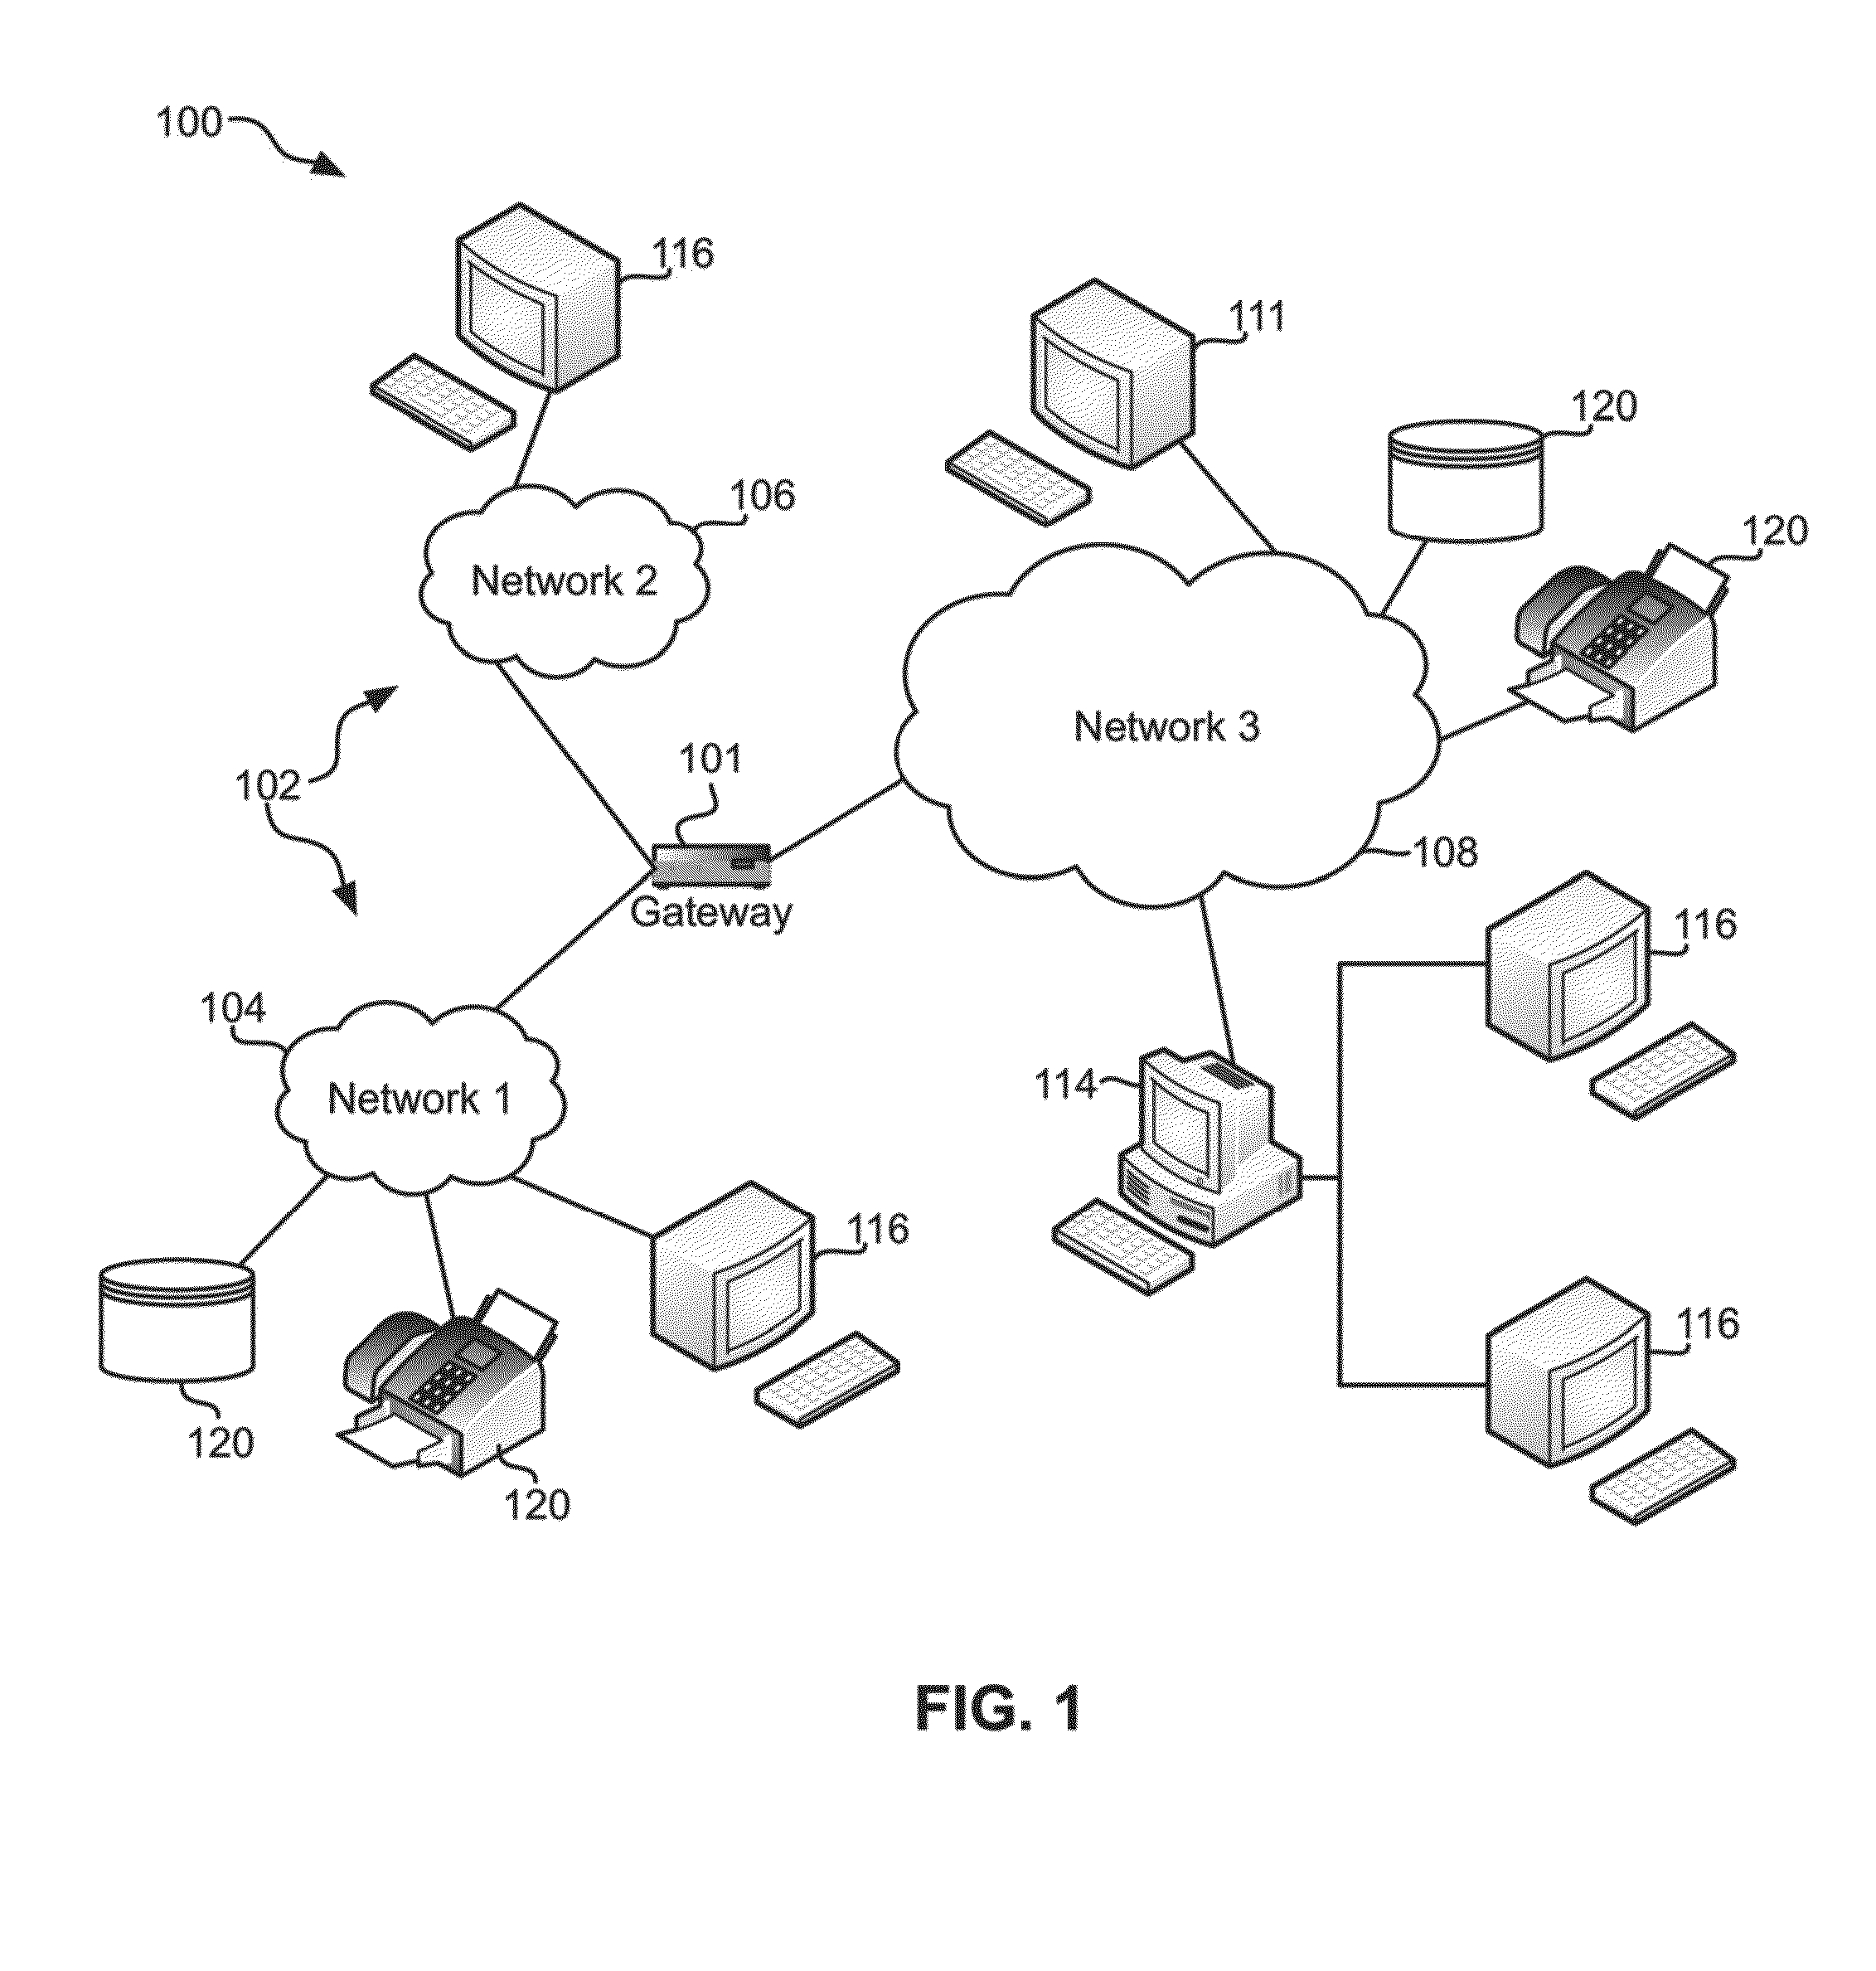 Methods for selectively enabling and disabling hardware features